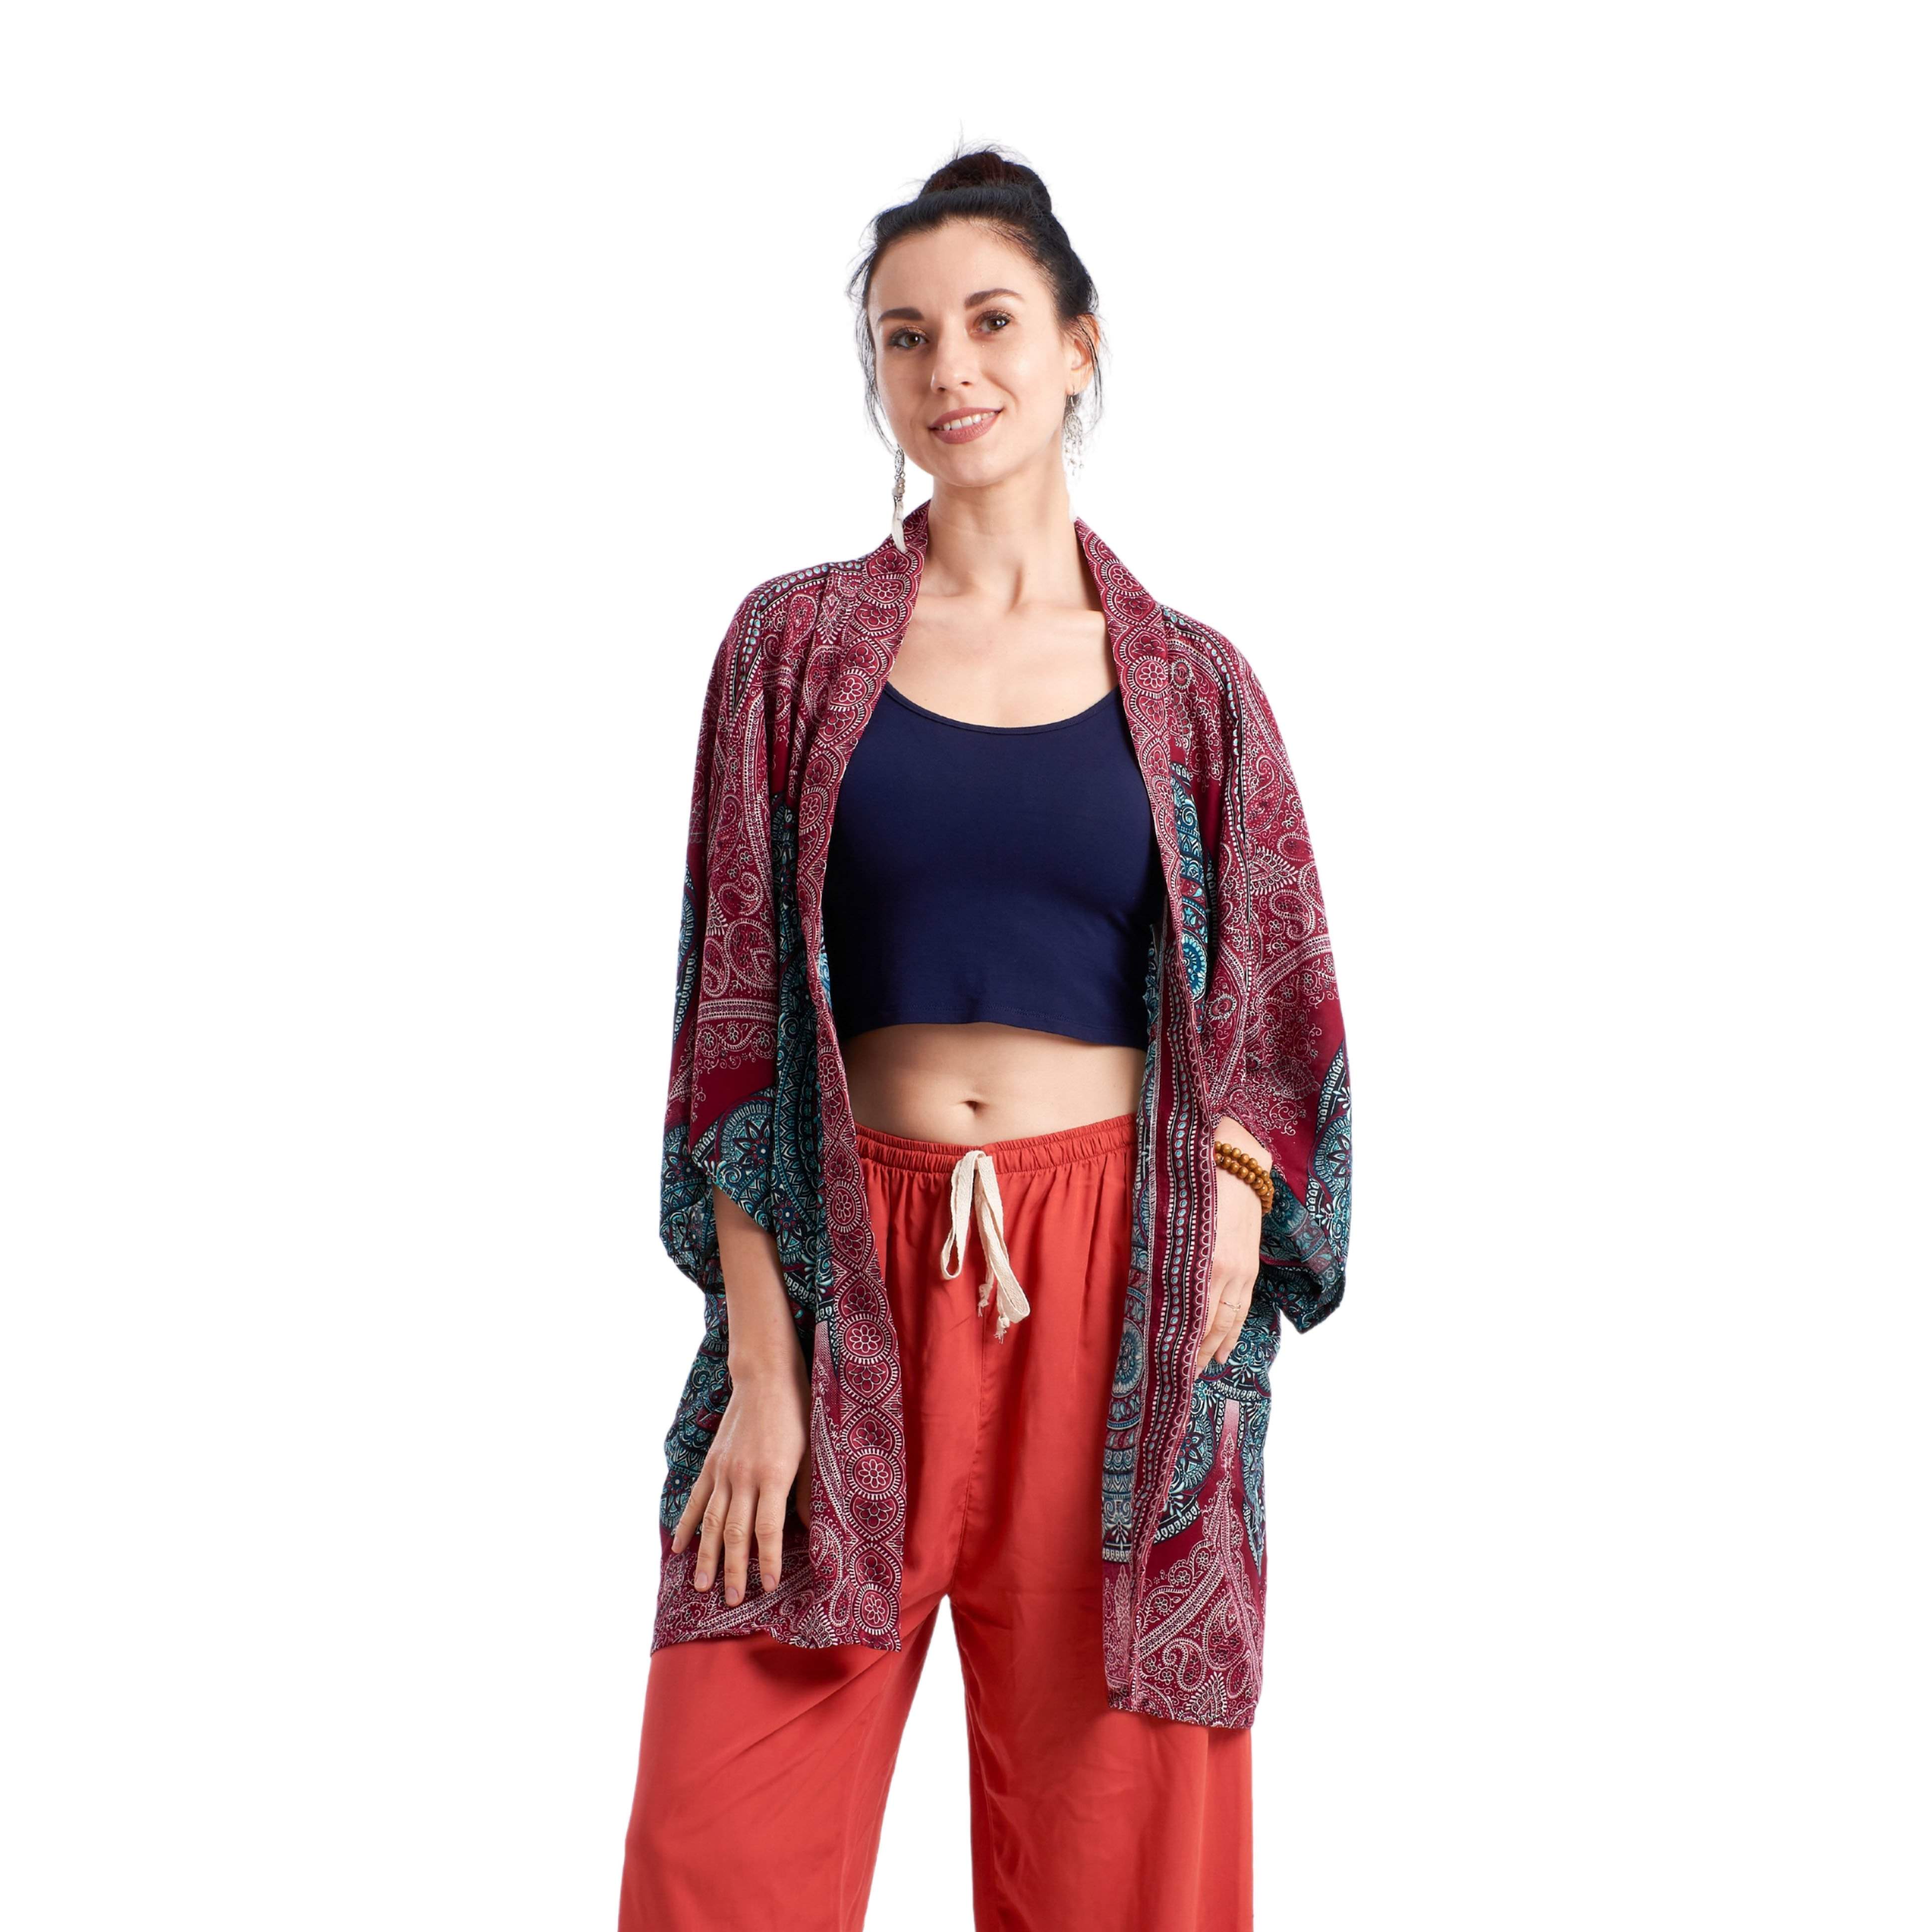 Unisex - Buy Today Elephant Pants Jewelry And Bohemian Clothes Handmade In Thailand Help To Save The Elephants FairTrade And Vegan